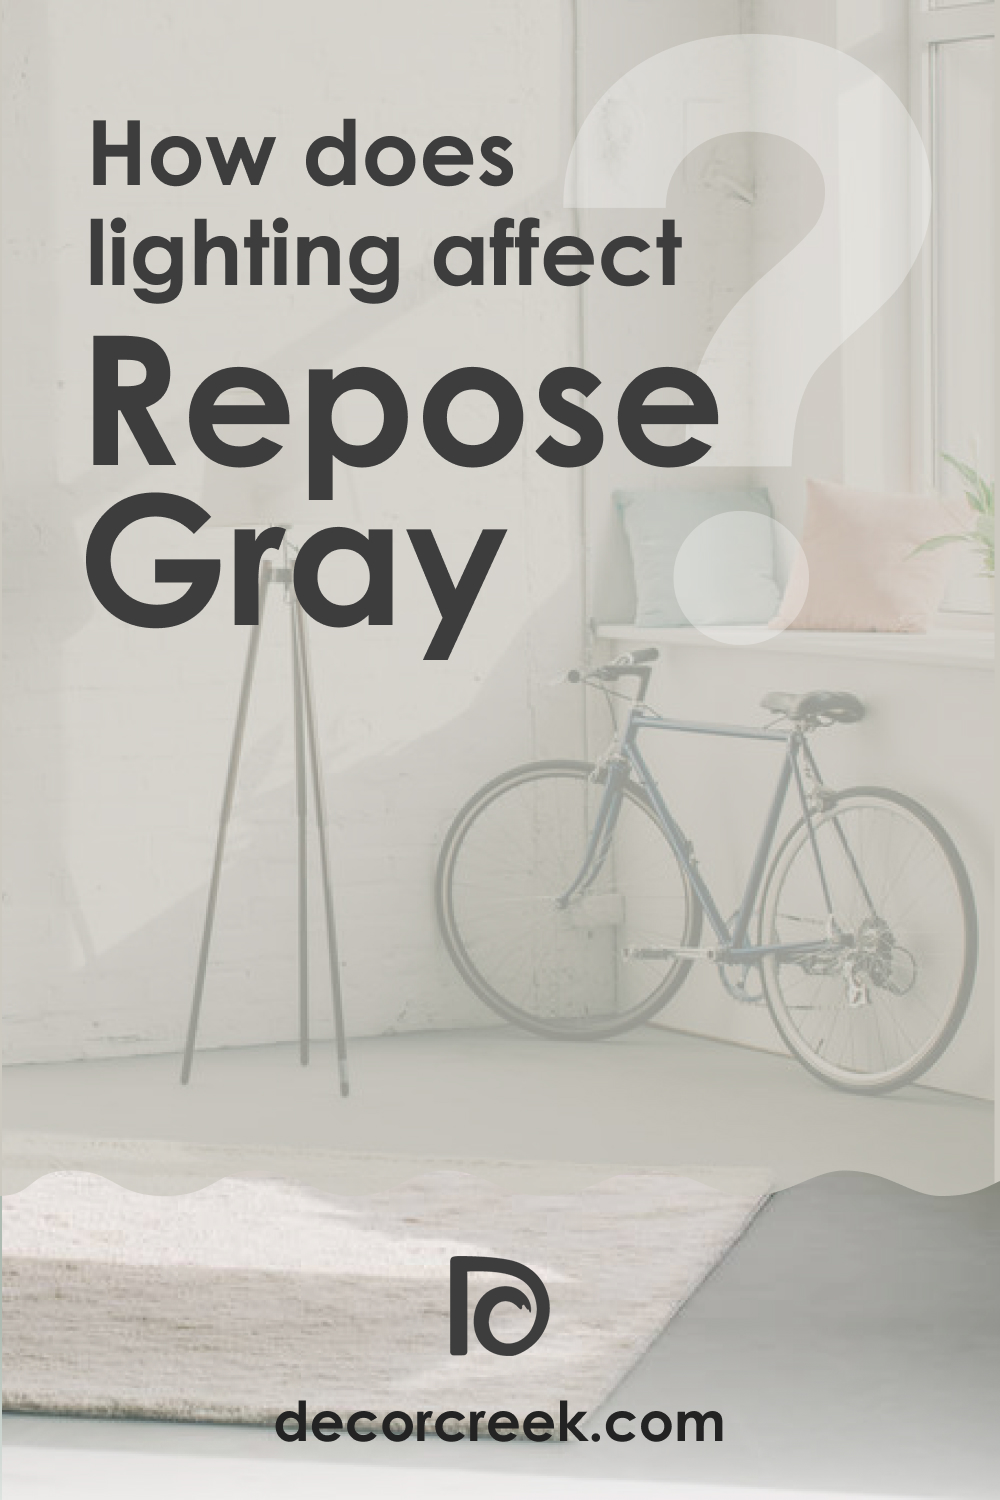 How Does Lighting Affect SW 7015 Repose Gray?